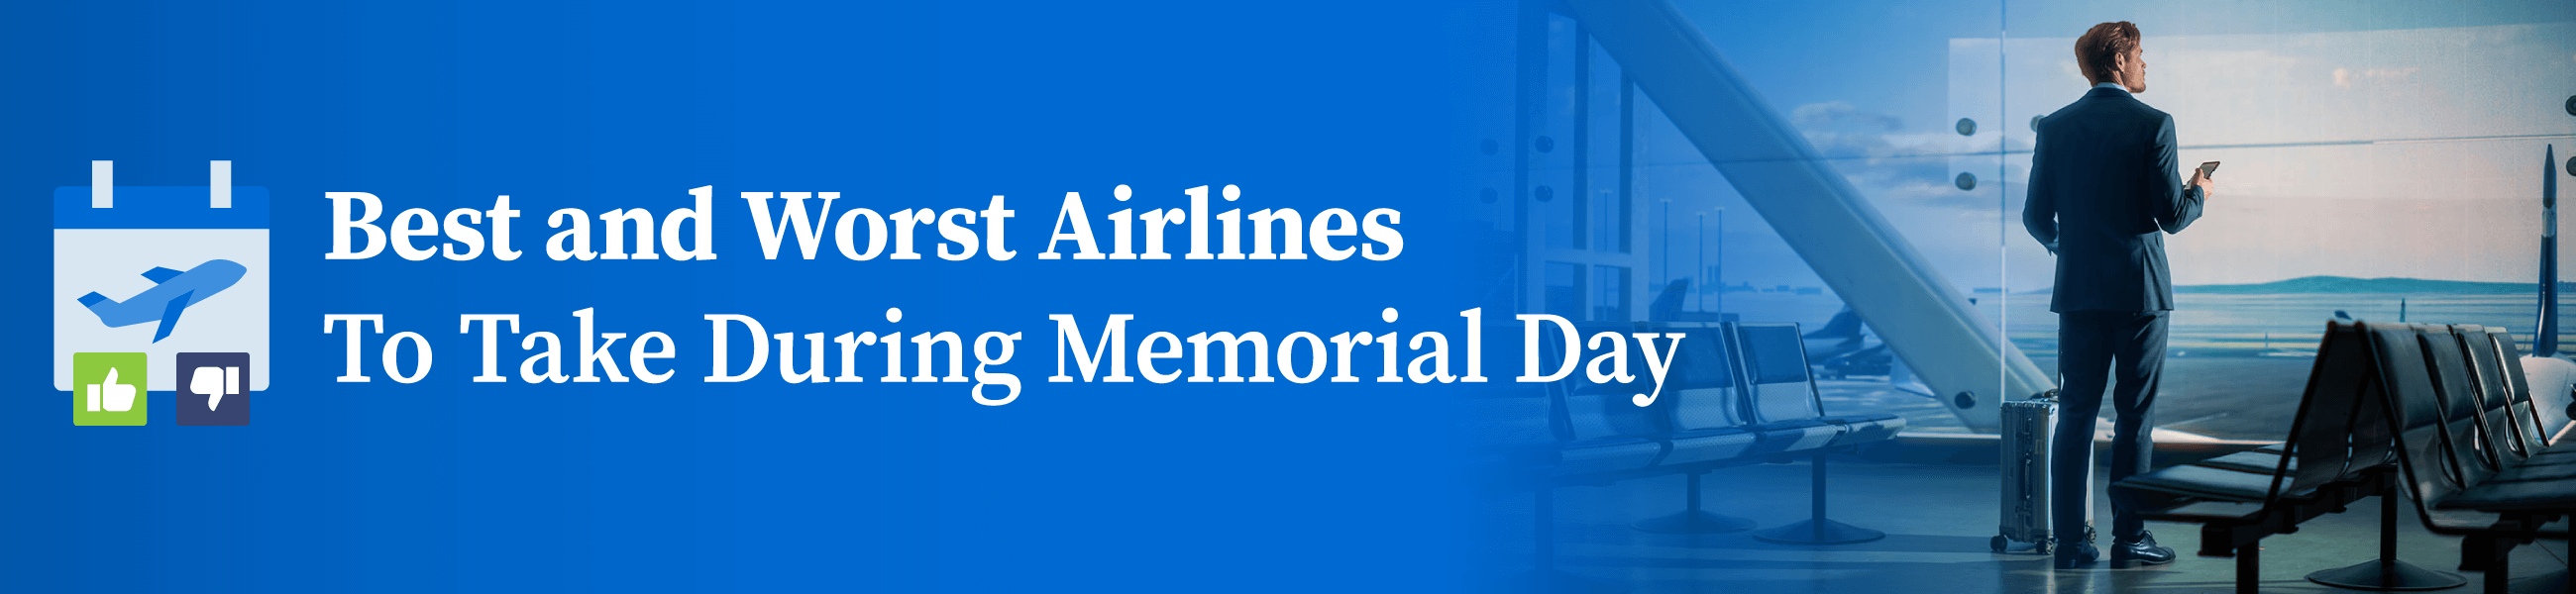 Best and Worst Airlines To Take During Memorial Day Header